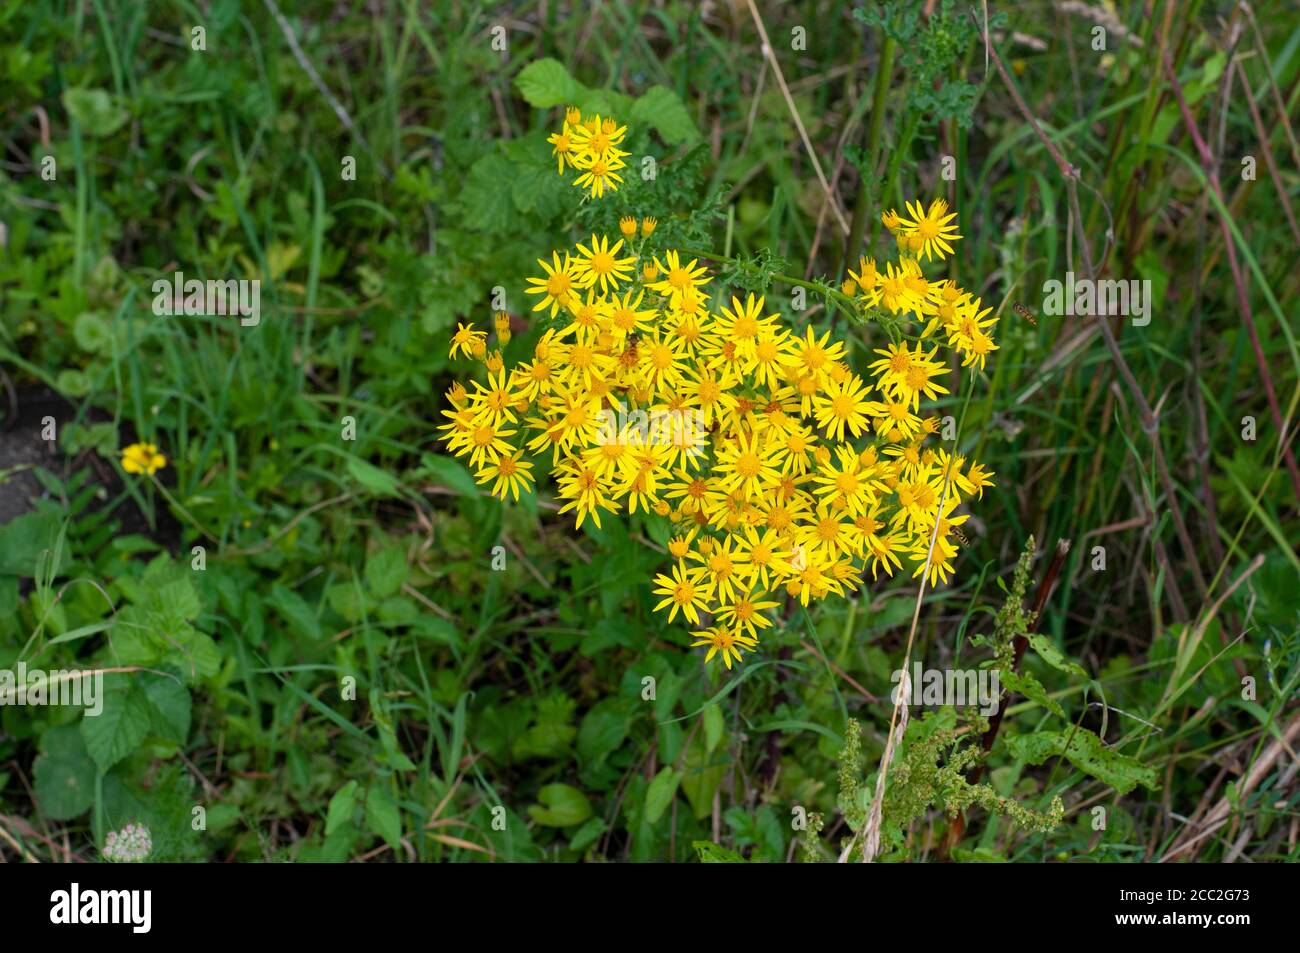 a common ragwort with yellow flowers, a plant poisonous for horses and cattle Stock Photo